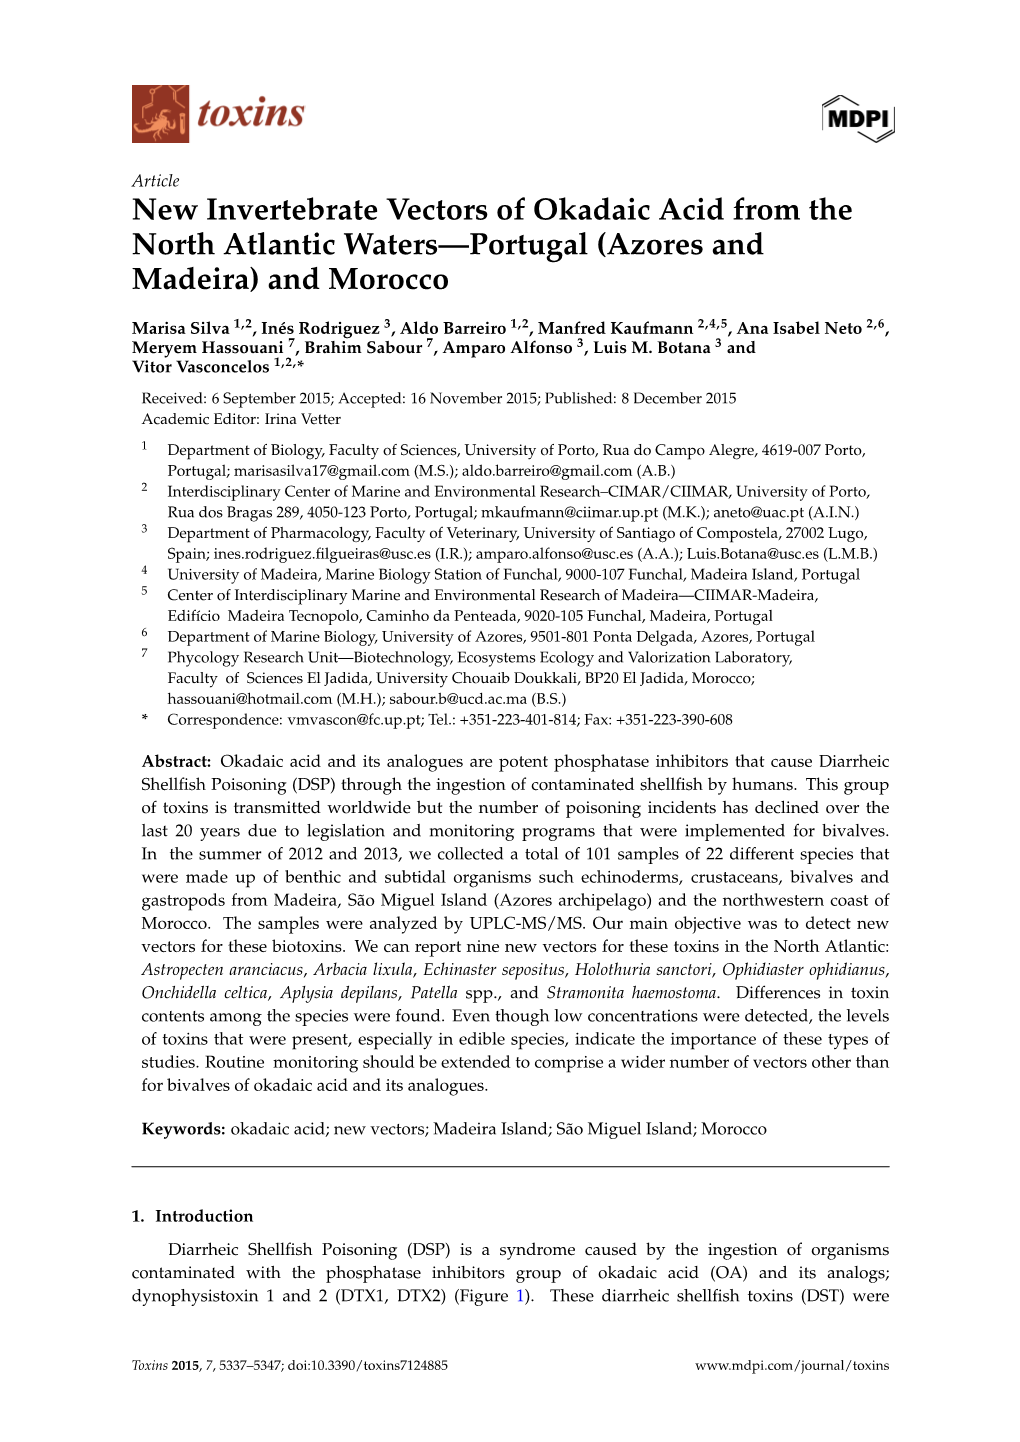 New Invertebrate Vectors of Okadaic Acid from the North Atlantic Waters—Portugal (Azores and Madeira) and Morocco